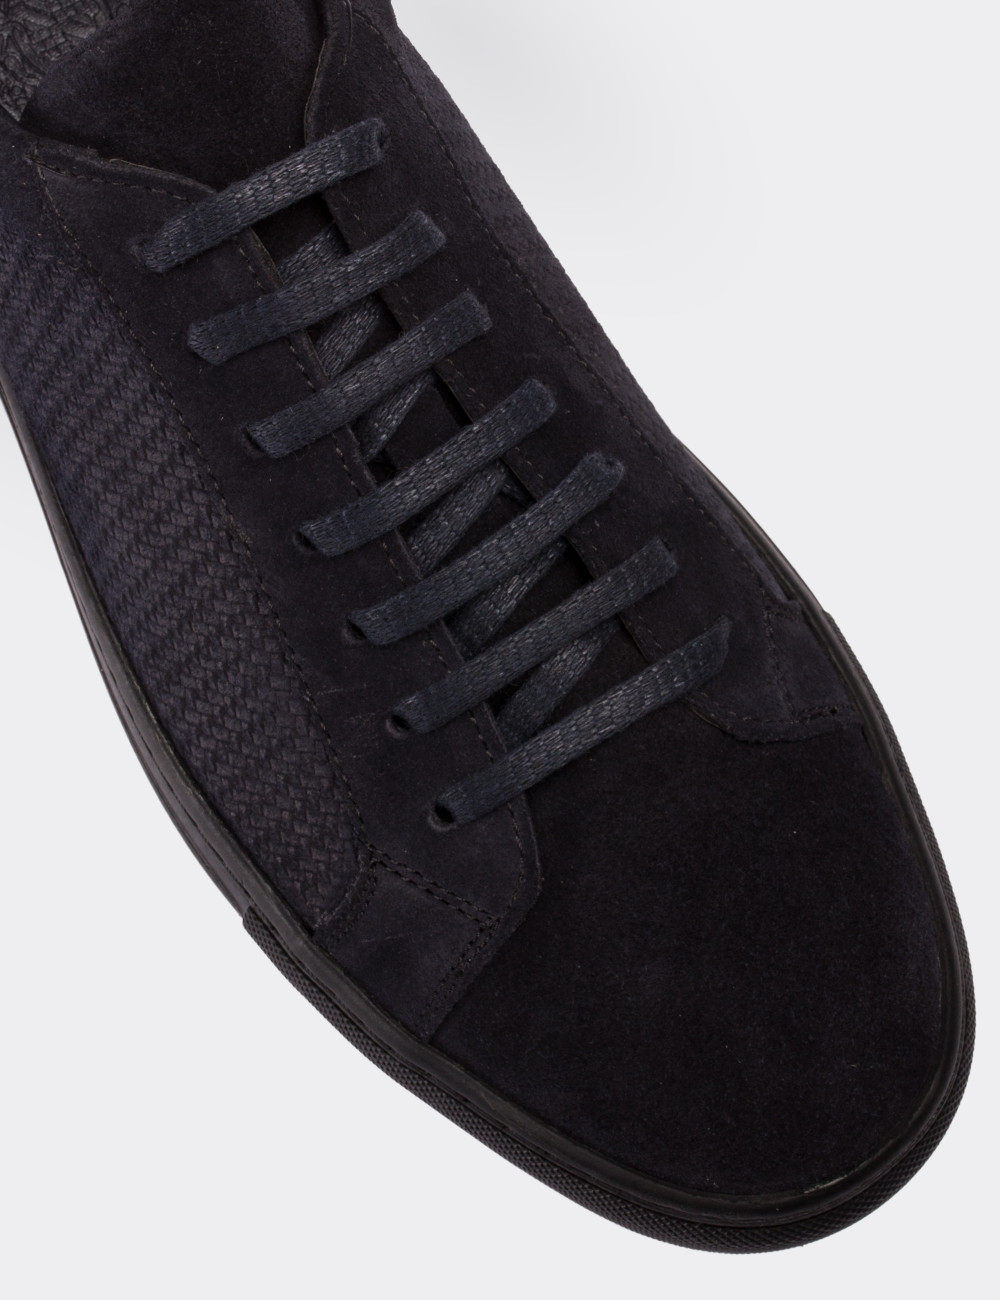 Navy Suede Leather Sneakers - 01681MLCVC02